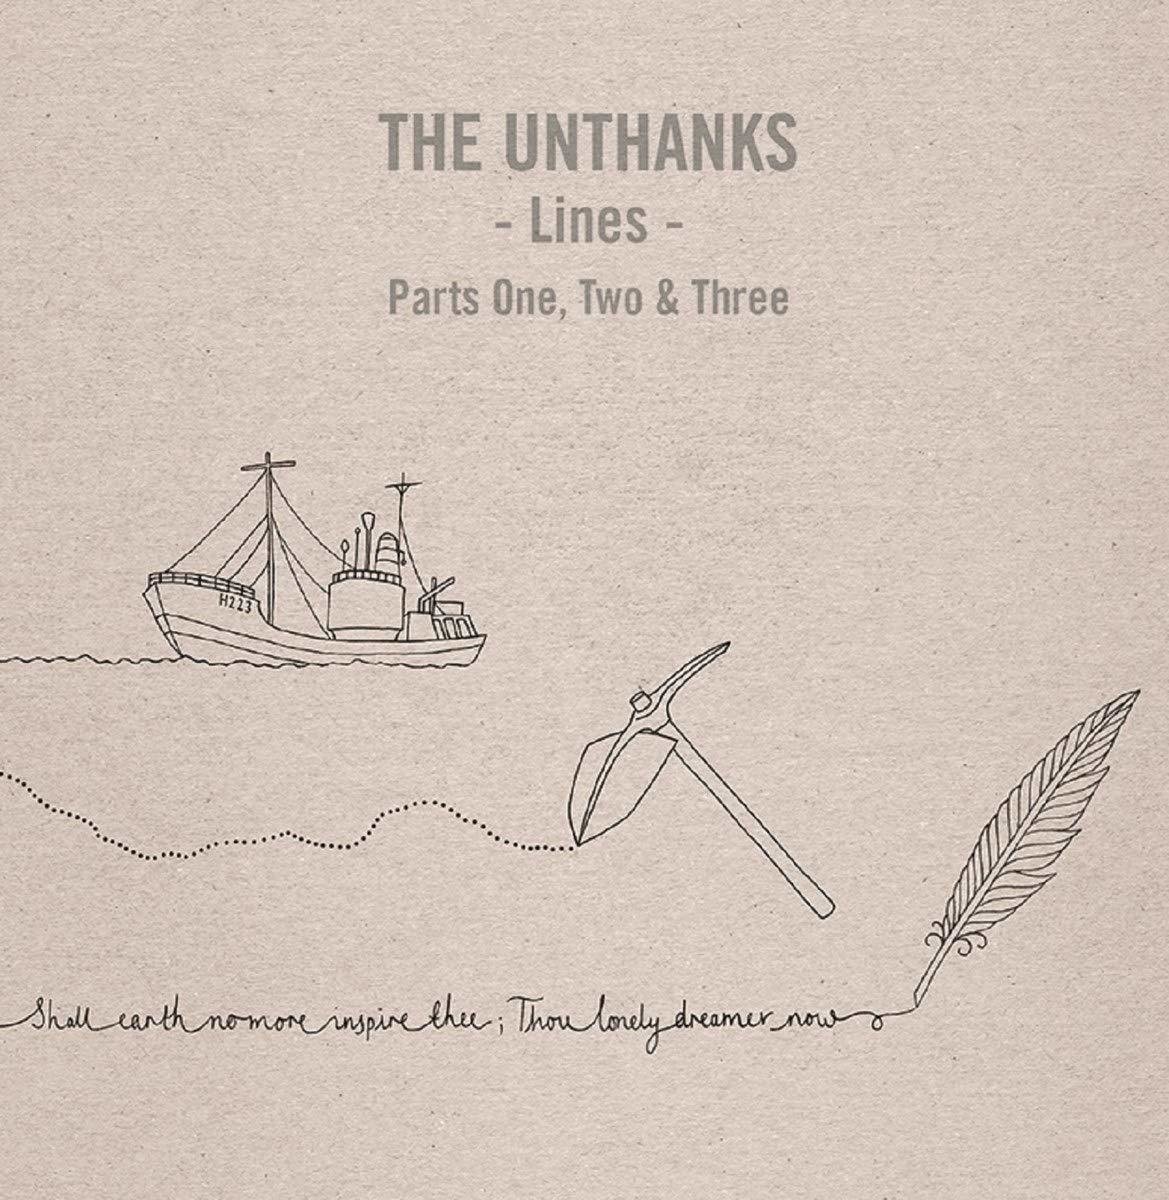 The Unthanks - Lines - Parts One